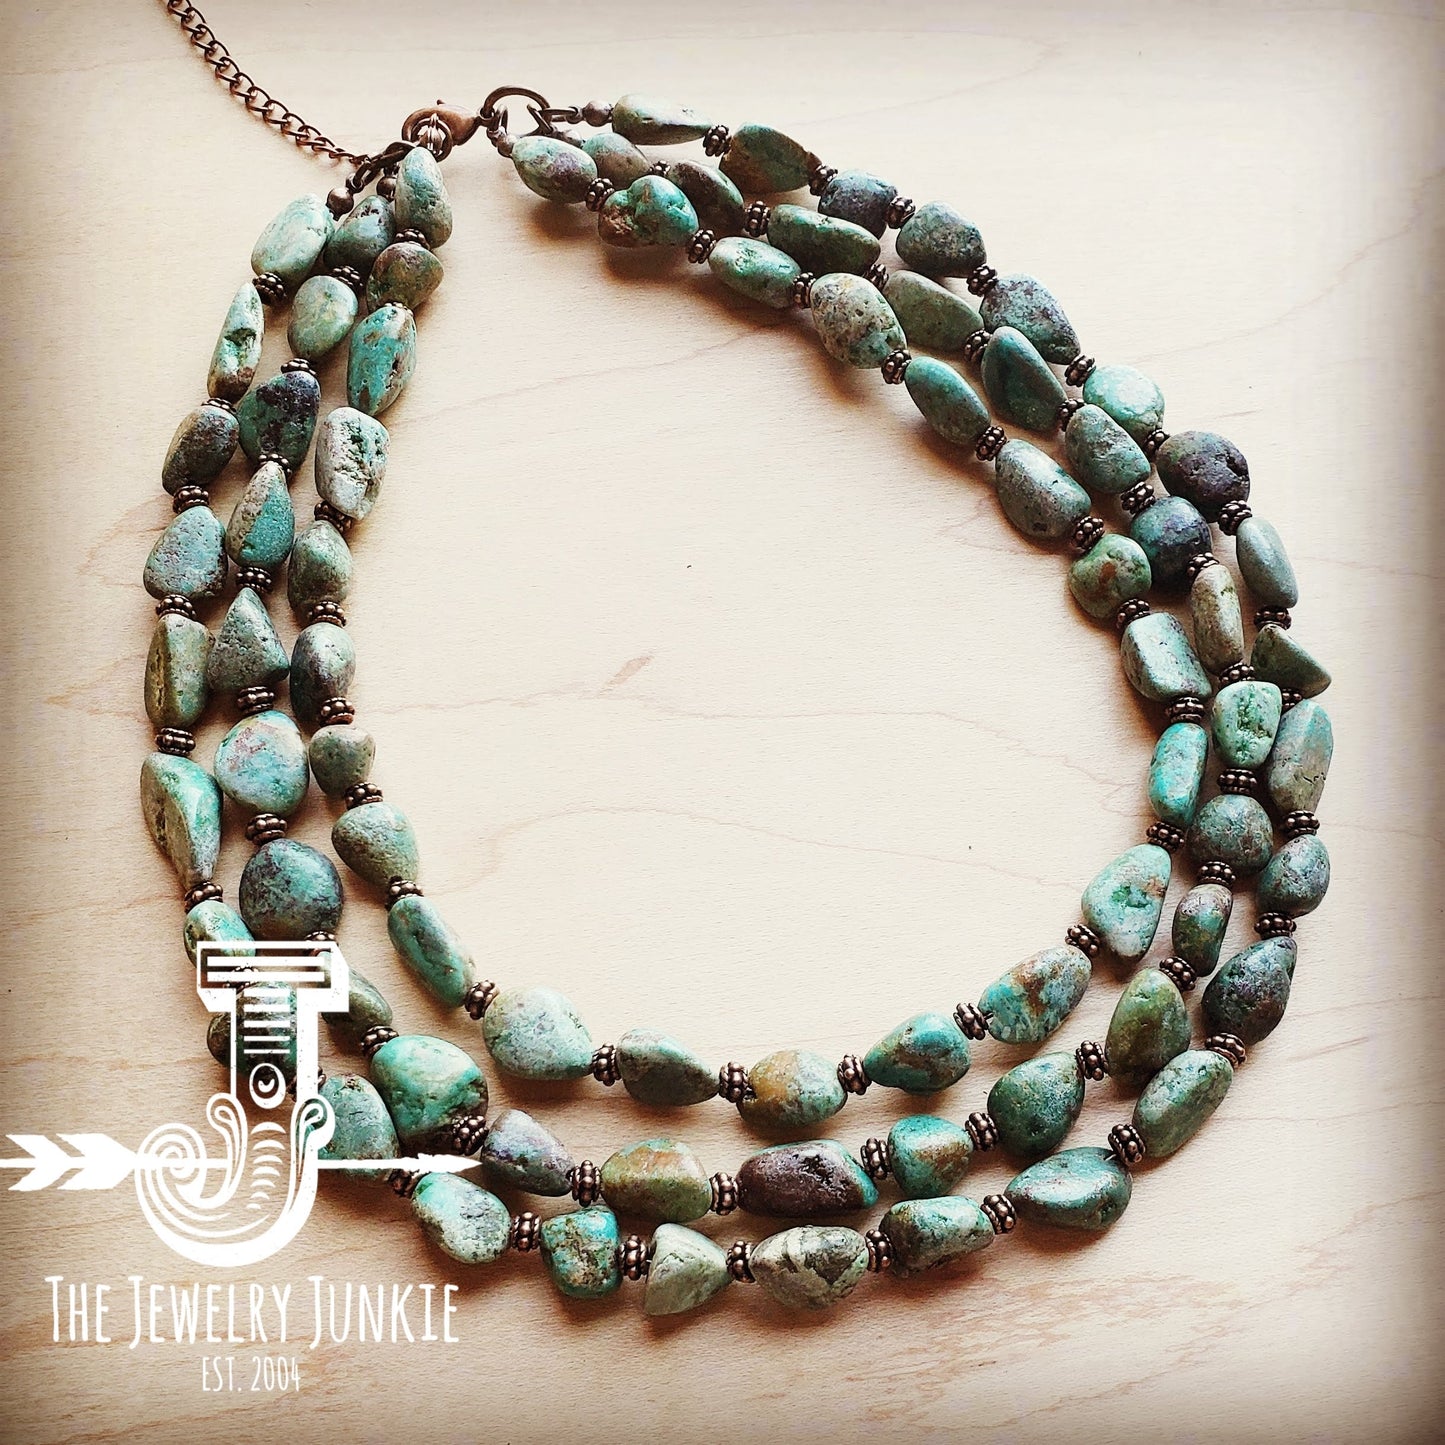 Triple Strand Natural Turquoise & Copper Collar Necklace 250n